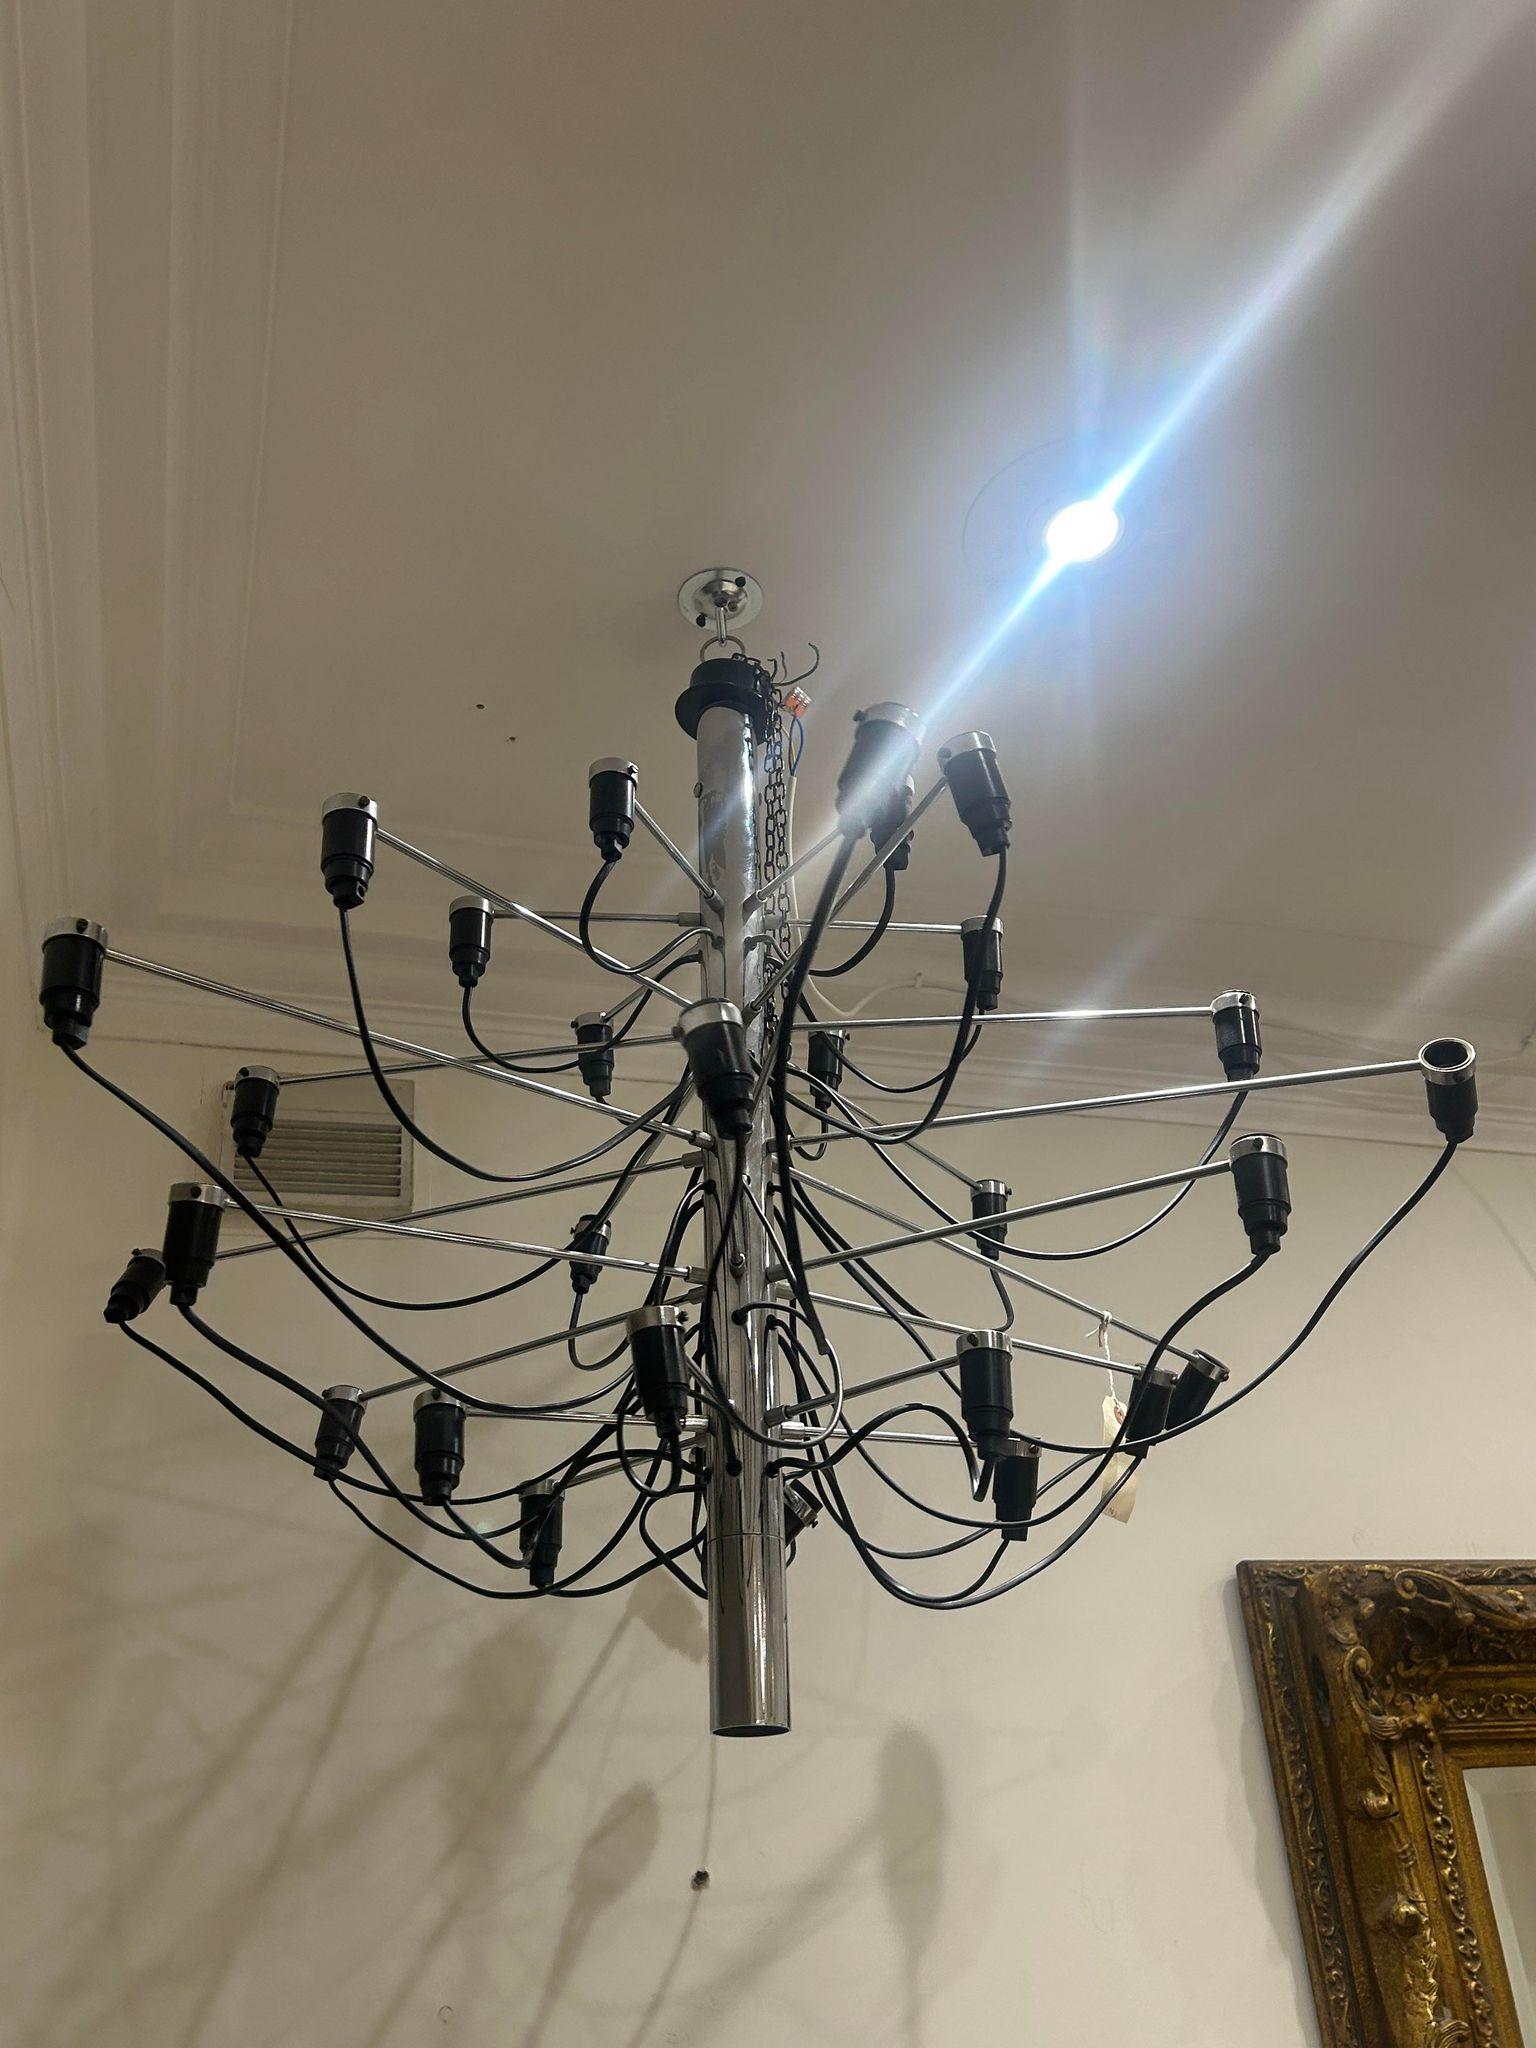 Since 1958, this iconic Gino Sarfatti design has served as an ultra-modern representation of the traditional mid-century chandelier. 

Every detail of this state-of-the-art ceiling light is exceptional, from the mirror-polish finish of its main